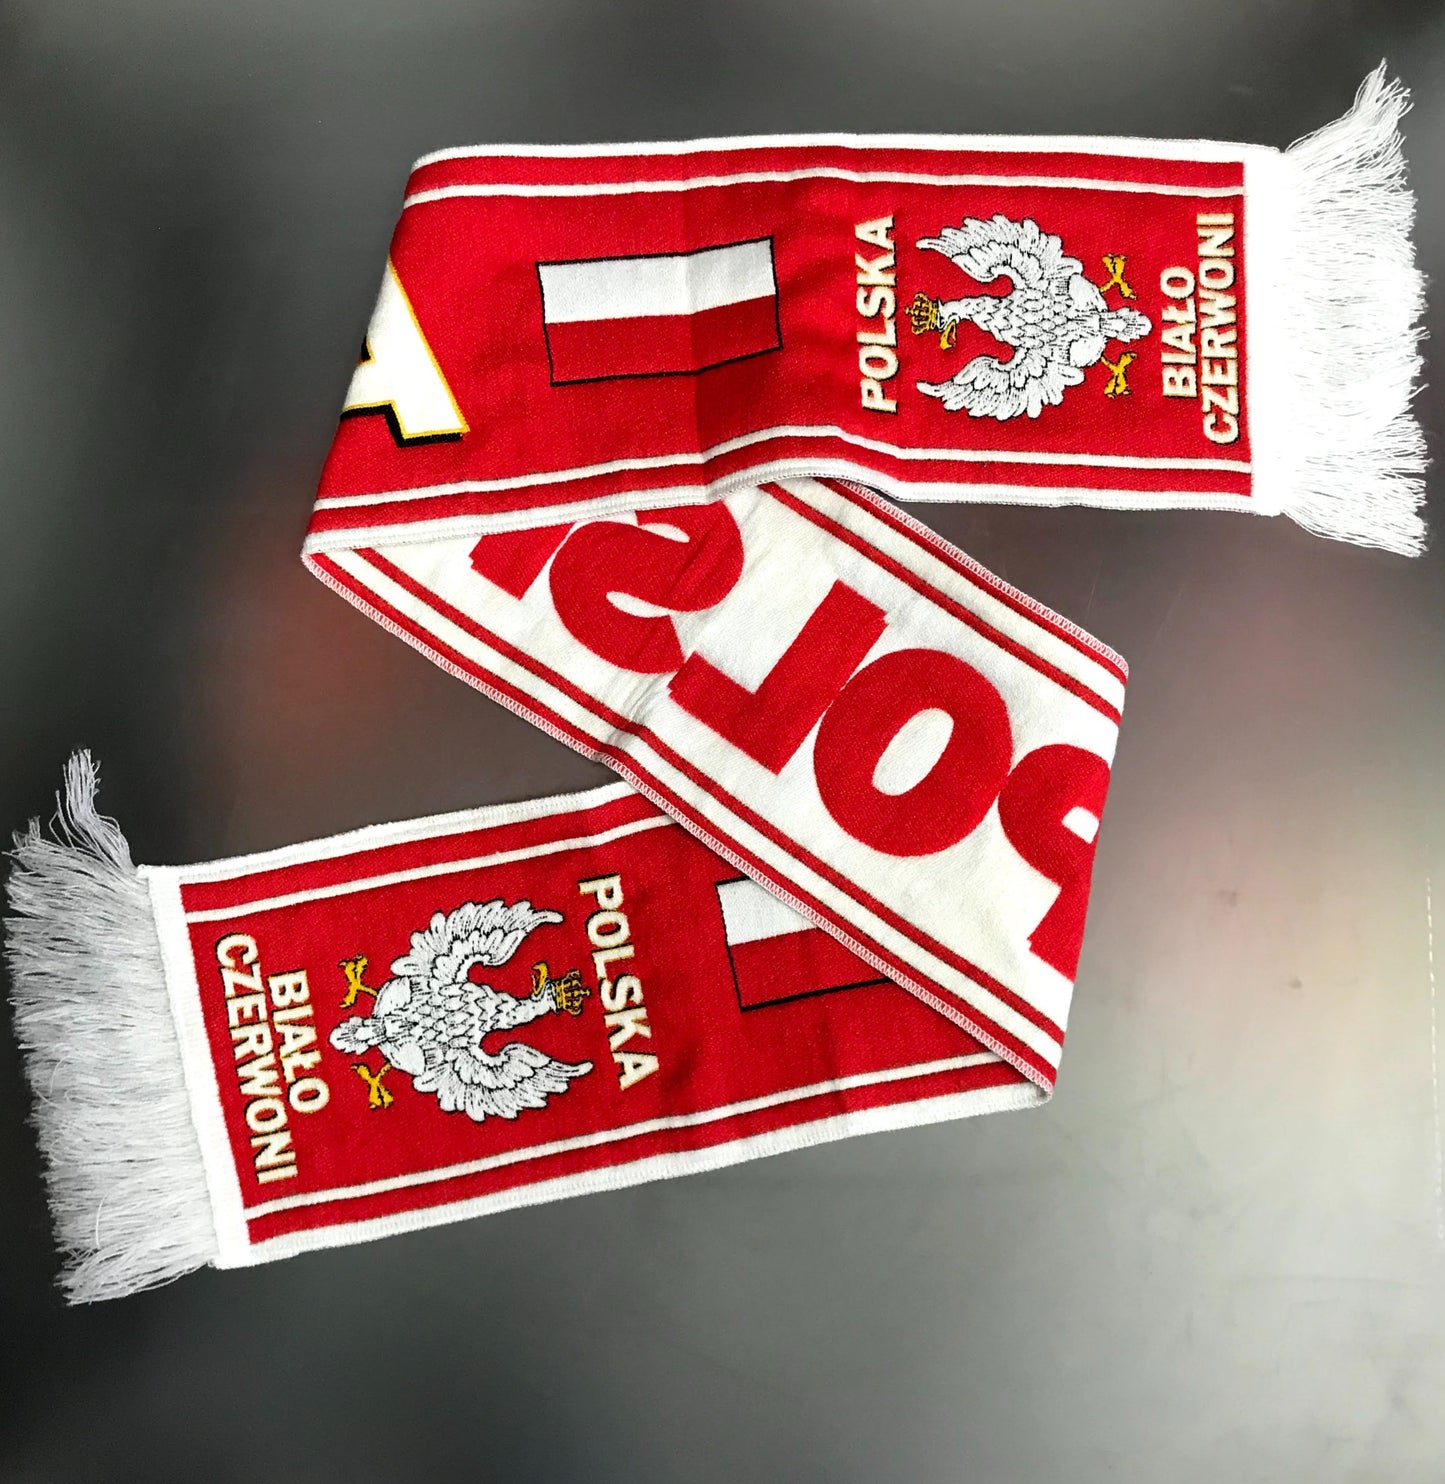 Polska Poland National Team Country Pride Scarf - Red Double-Sided Knitted. MADE IN POLAND.